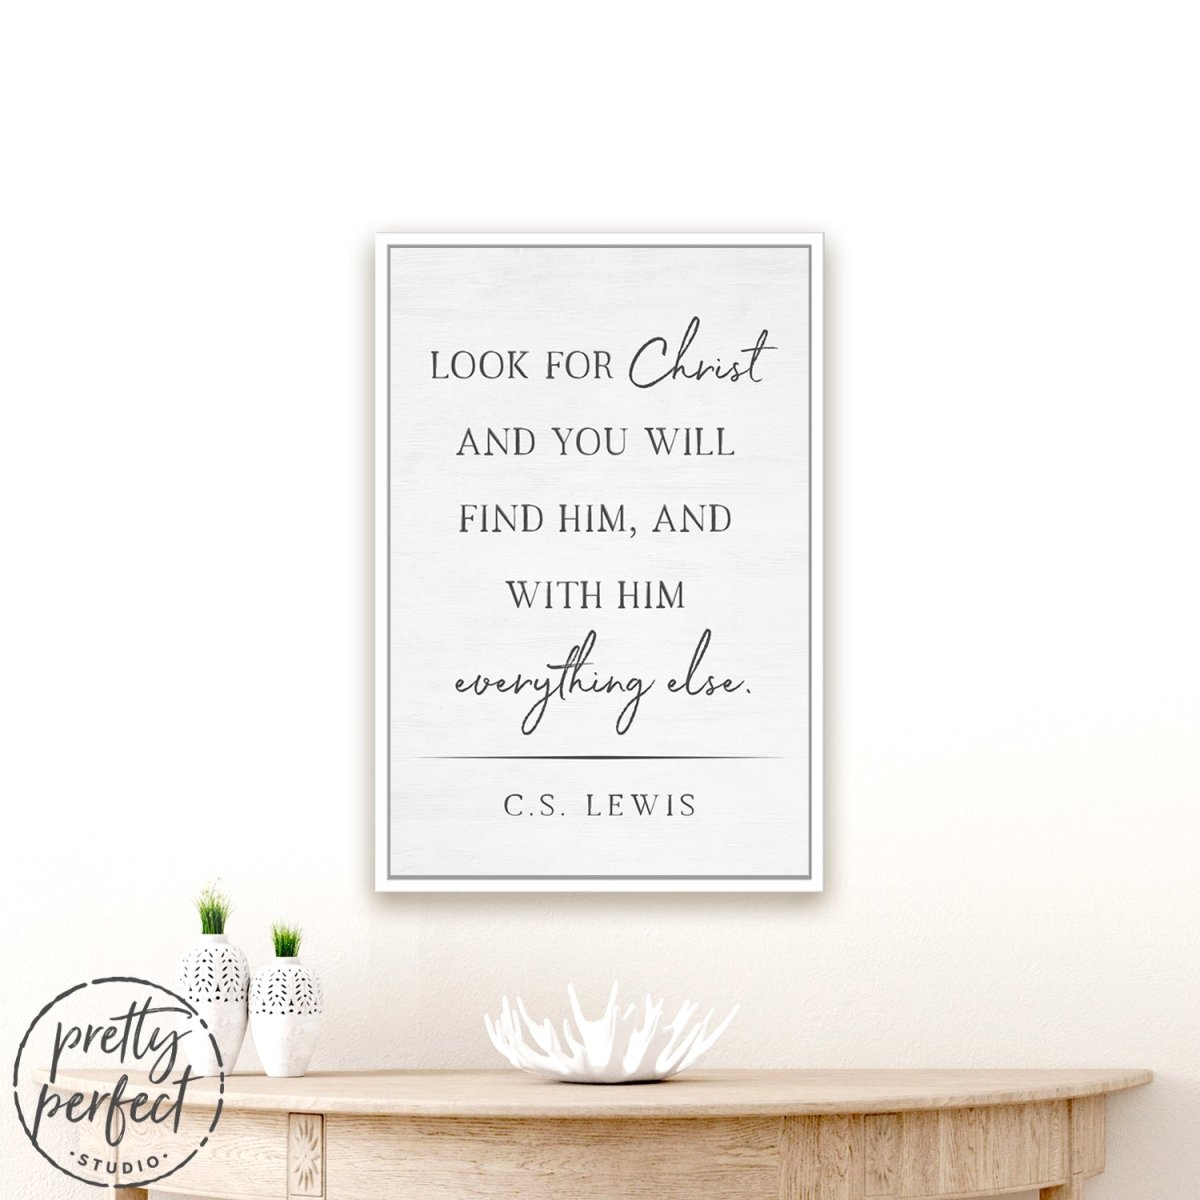 Look For Christ CS Lewis Sign Hanging on Wall Above Table - Pretty Perfect Studio